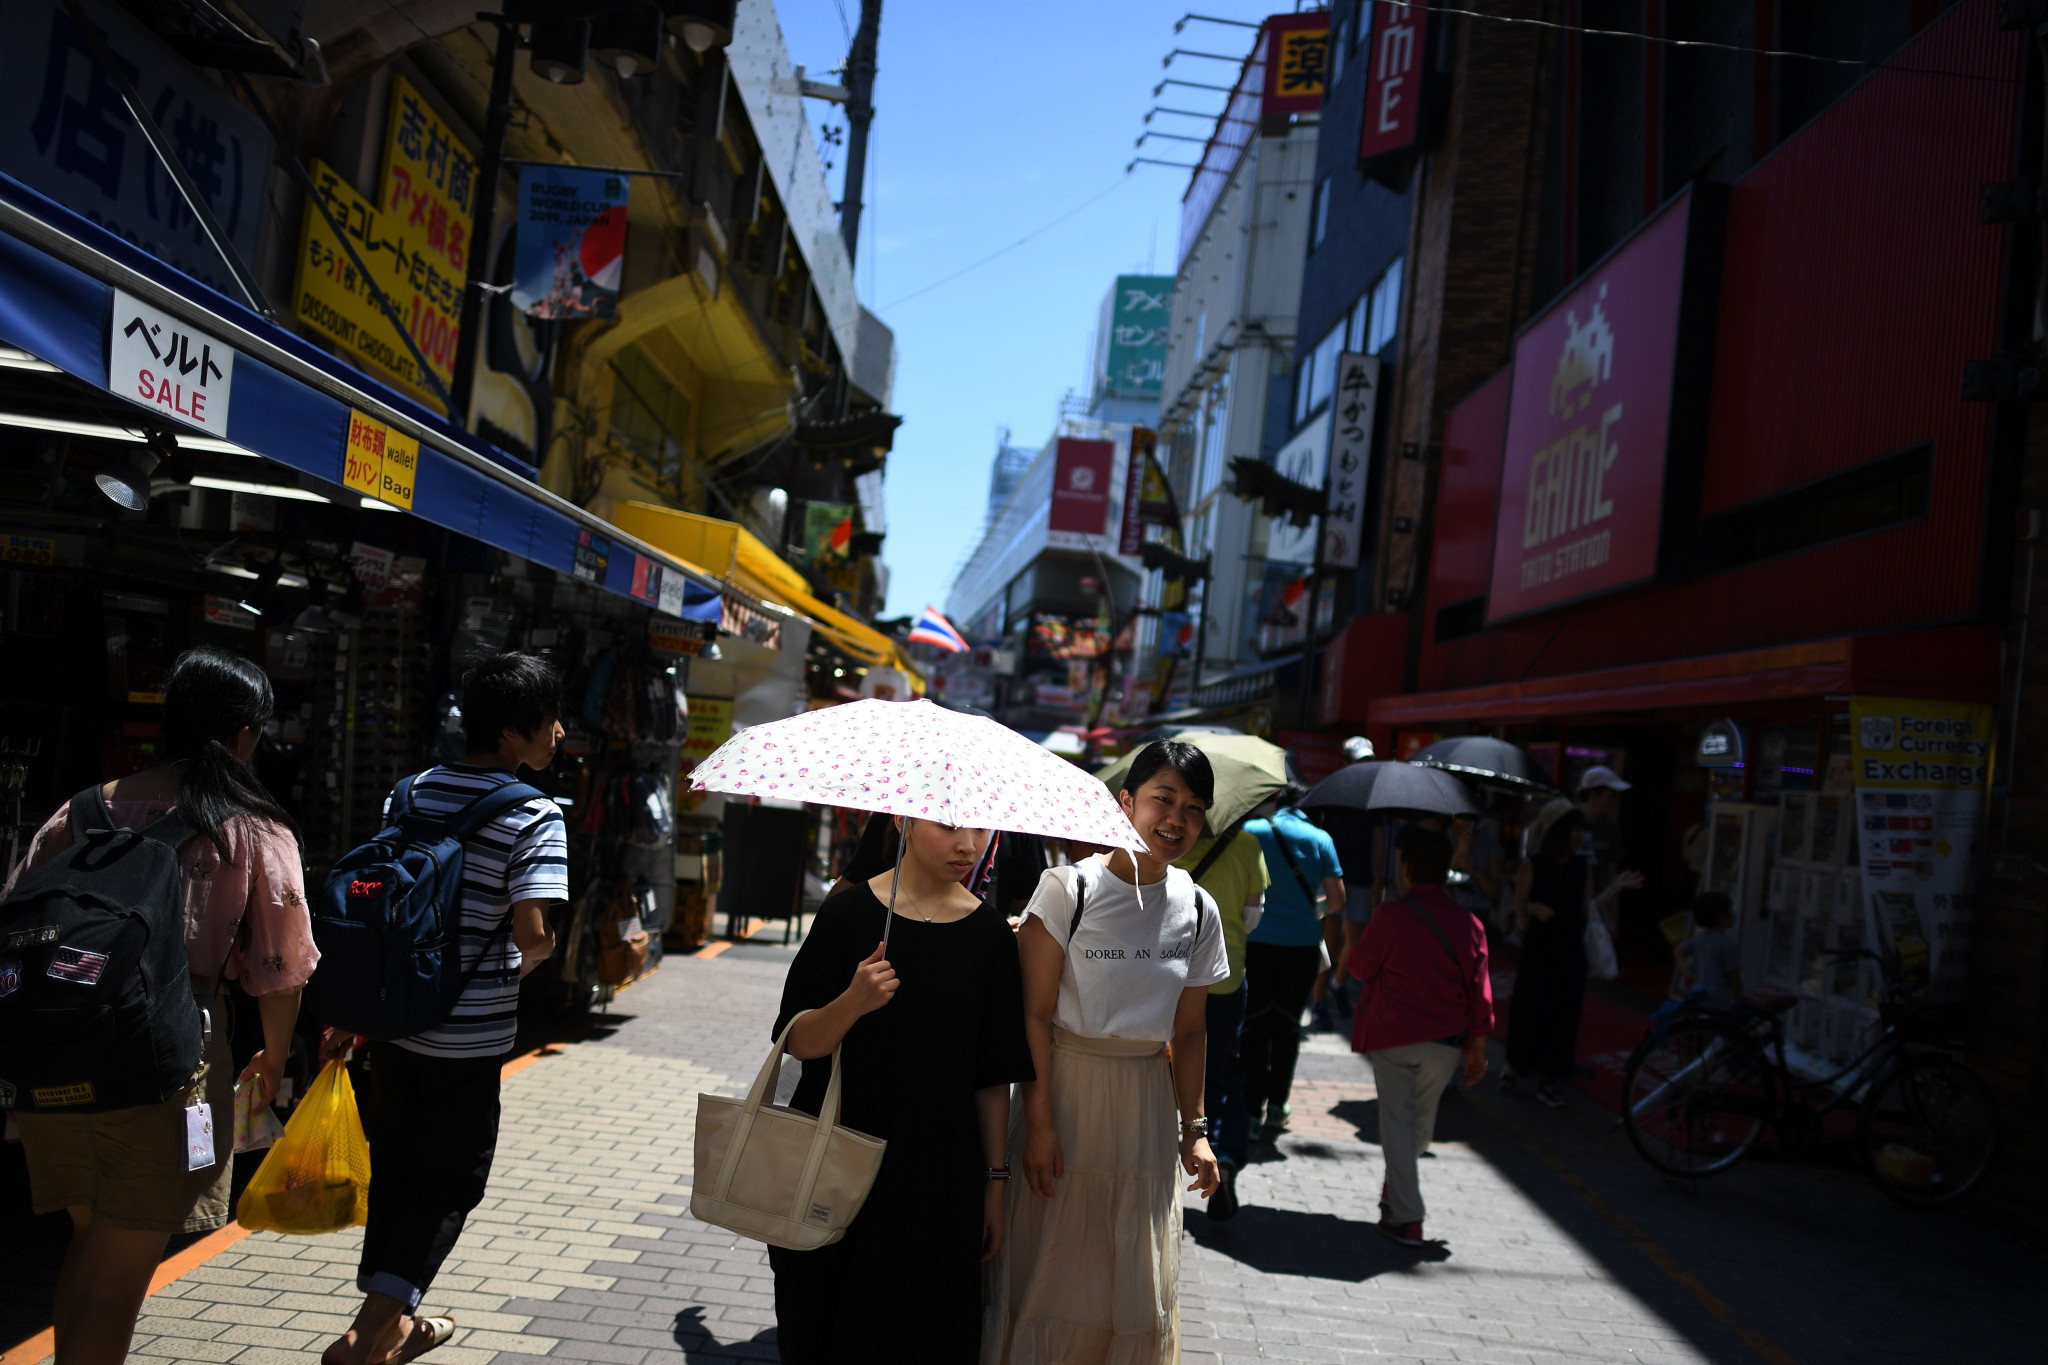 Japanese residents have used umbrellas to help shield themselves from the heat as temperatures soared beyond 30 Celsius, causing tens of deaths and thousands of people to be taken to hospital ©Getty Images